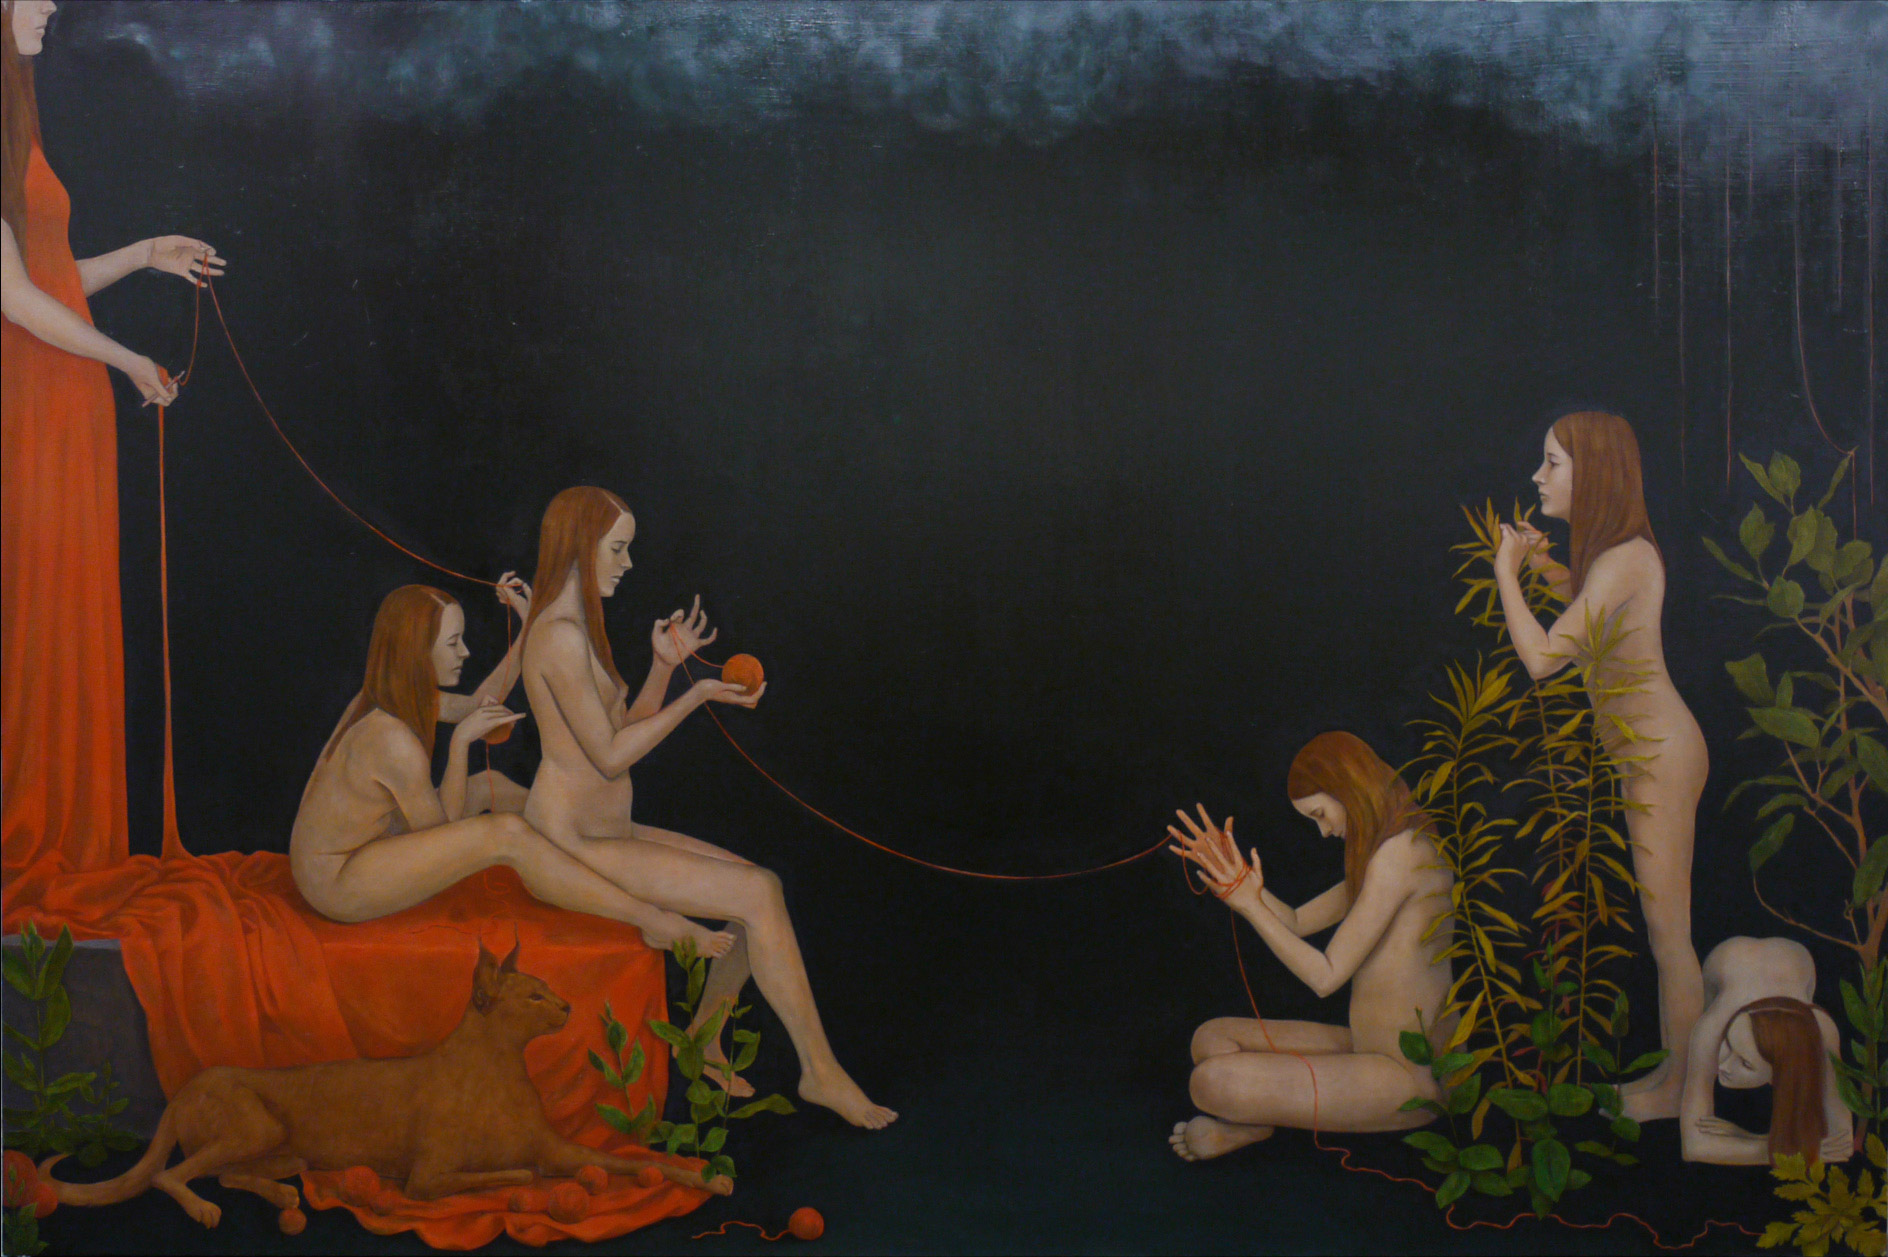 "Ritual in the Courtyard" 48x72 in, oil on canvas, 2012